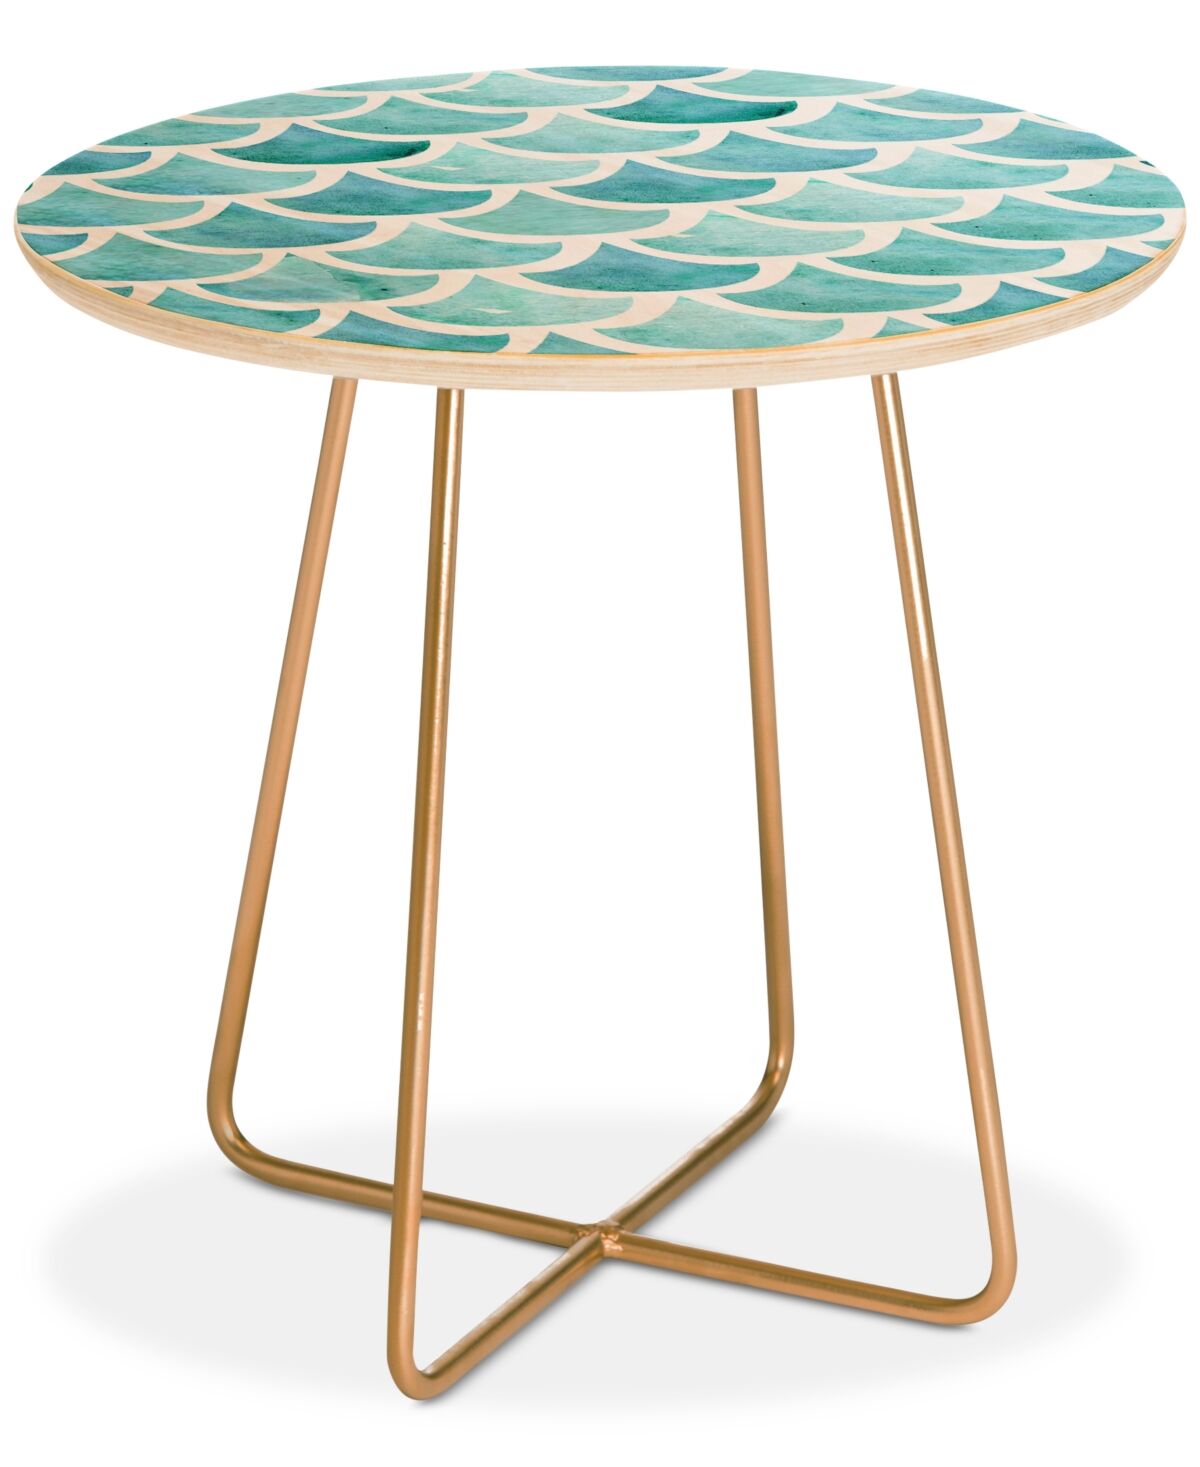 Deny Designs Hello Sayang La Mer Round Side Table - Turquoise